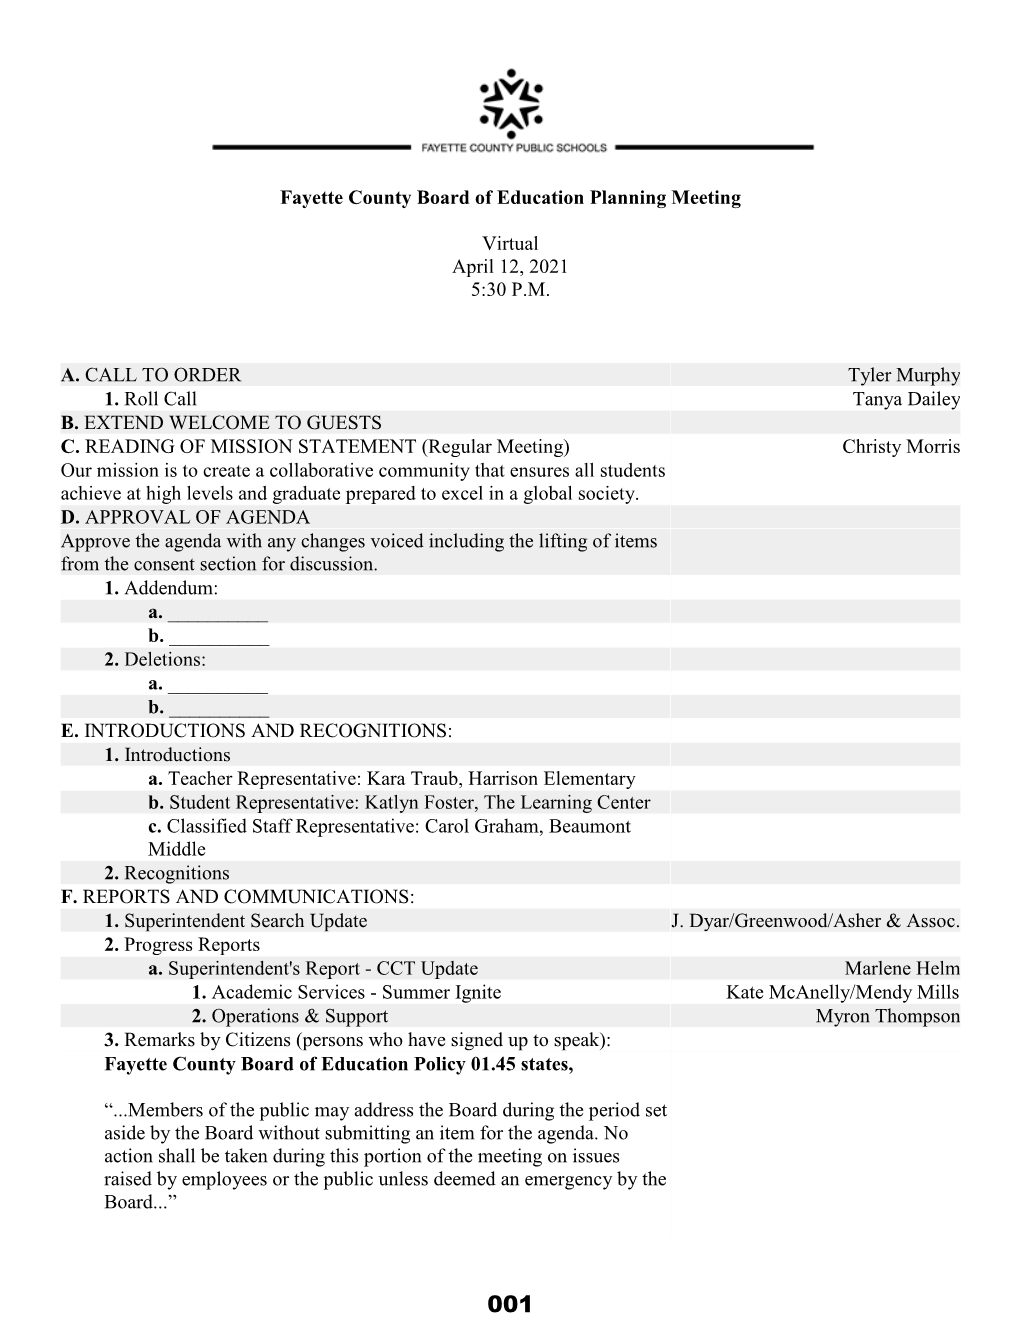 Fayette County Board of Education Planning Meeting Virtual April 12